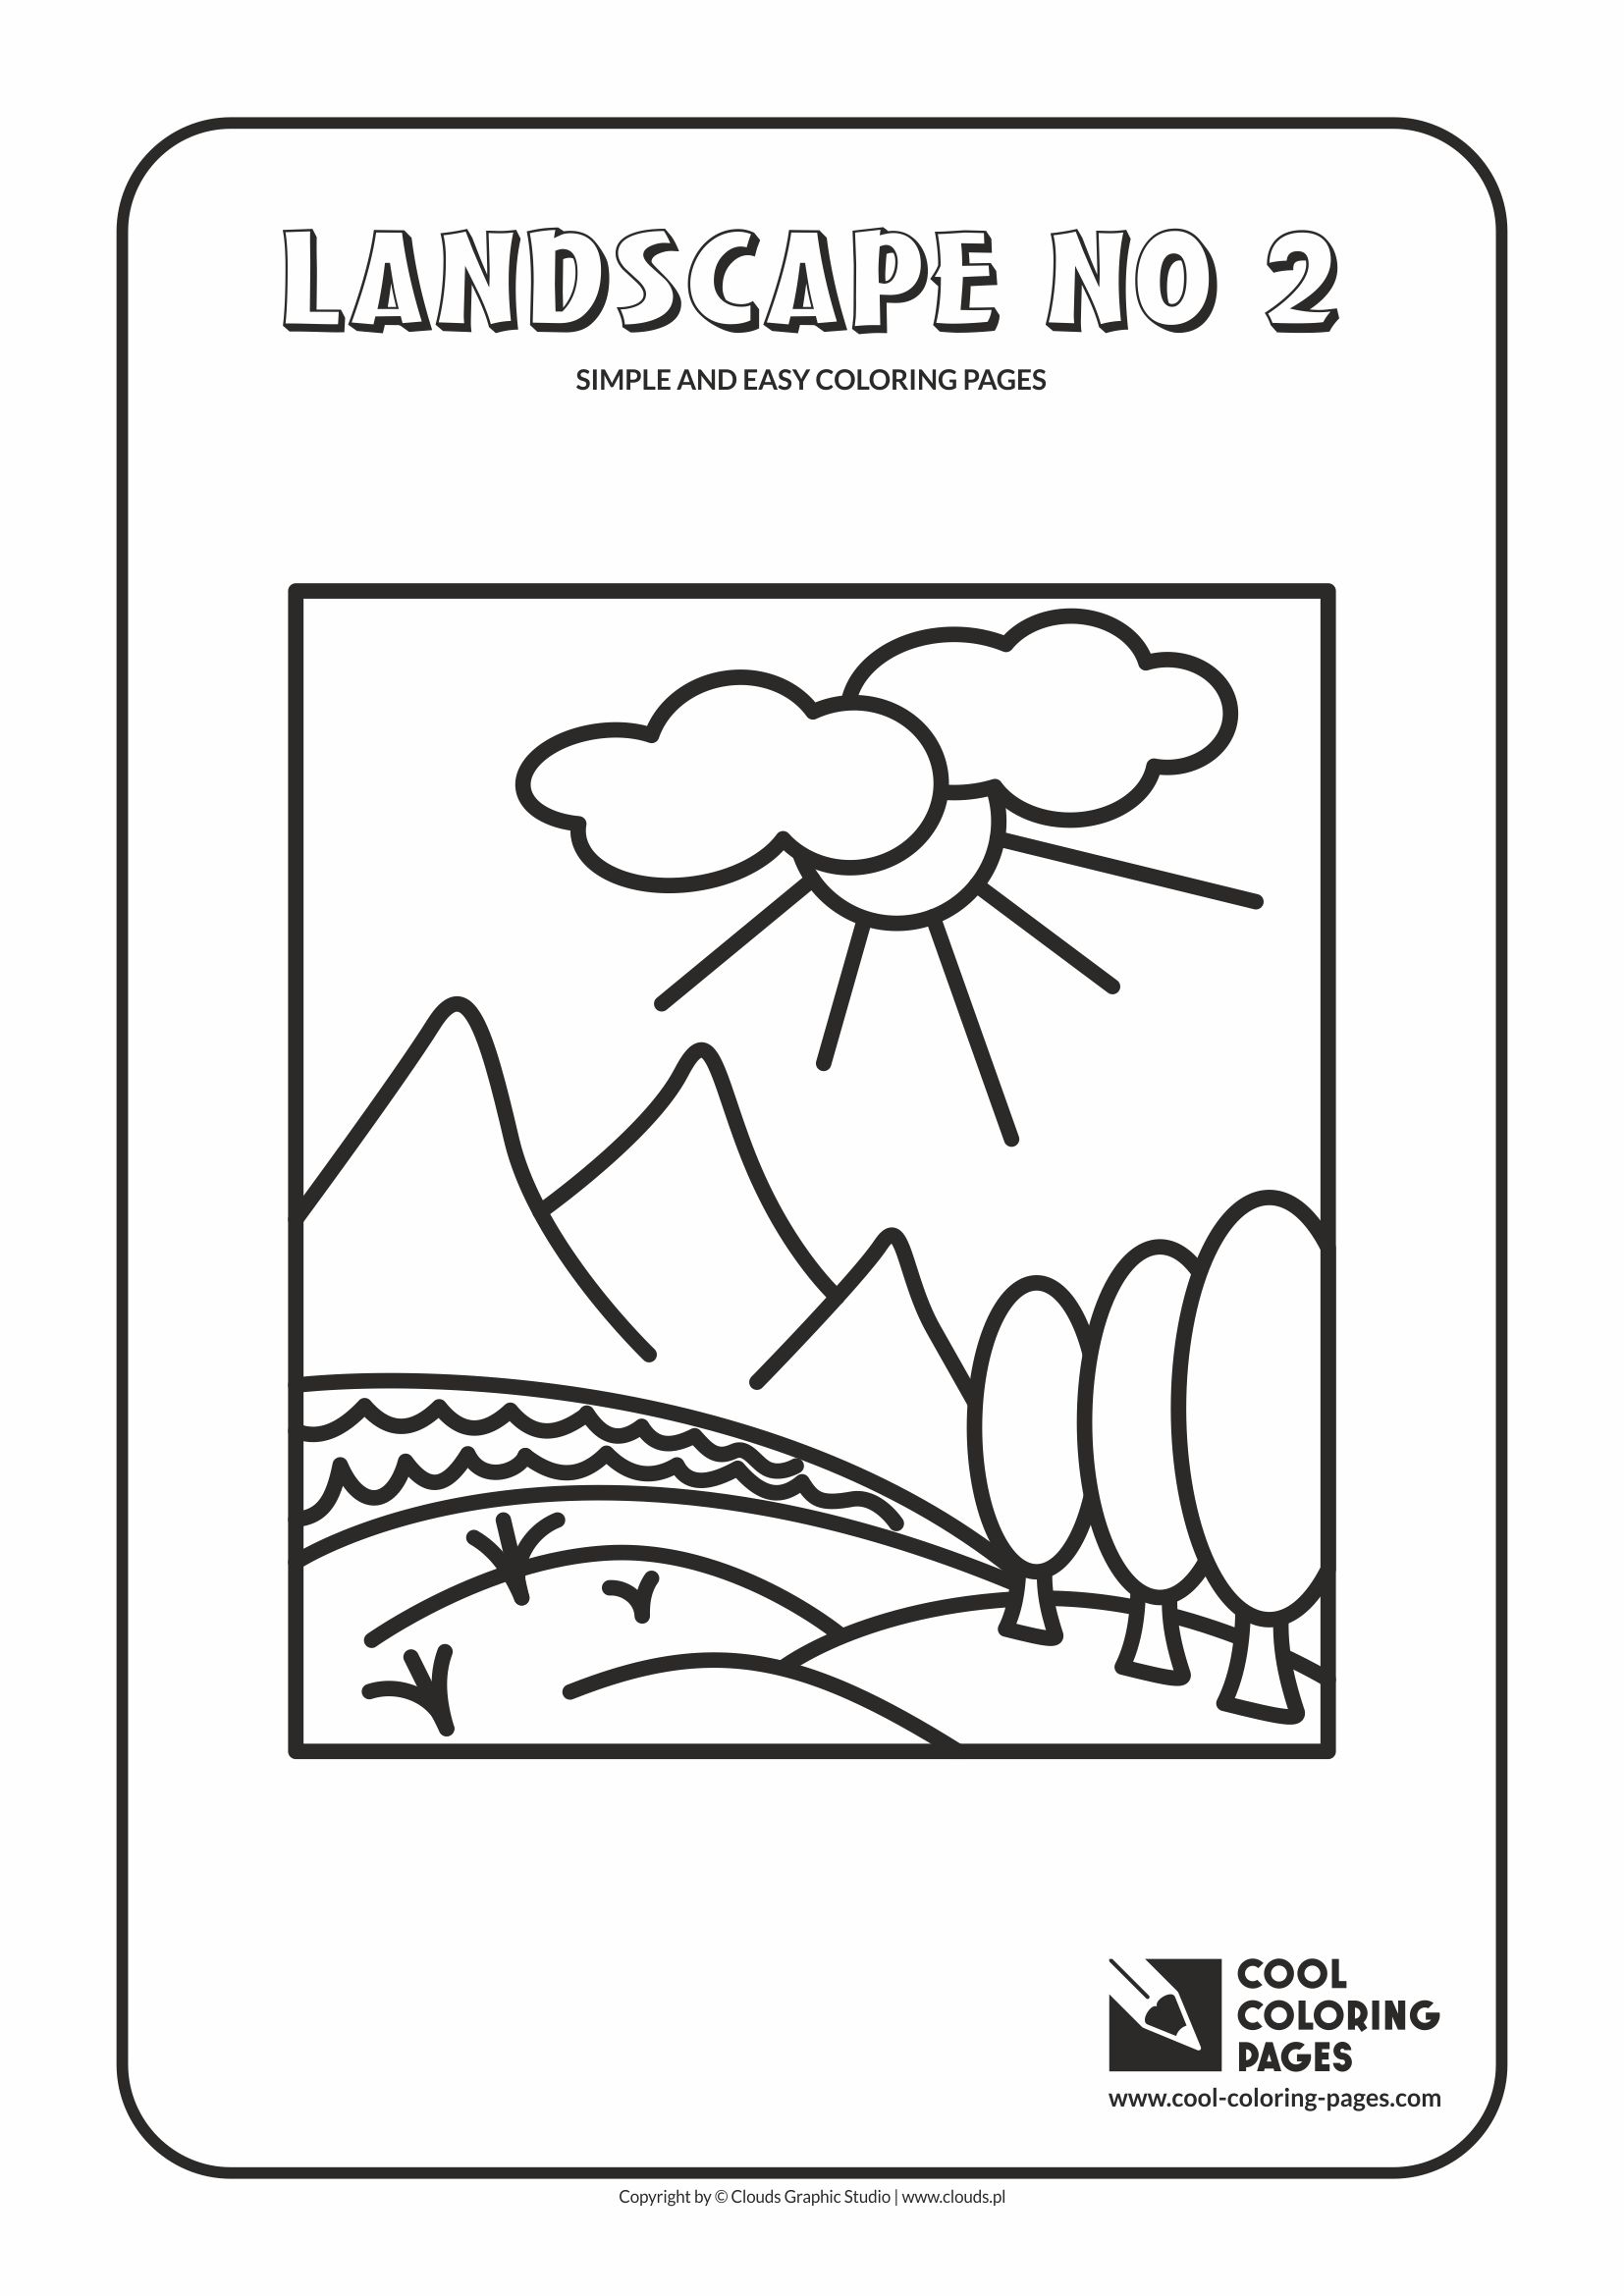 Simple and easy coloring pages for toddlers - Landscape no 2